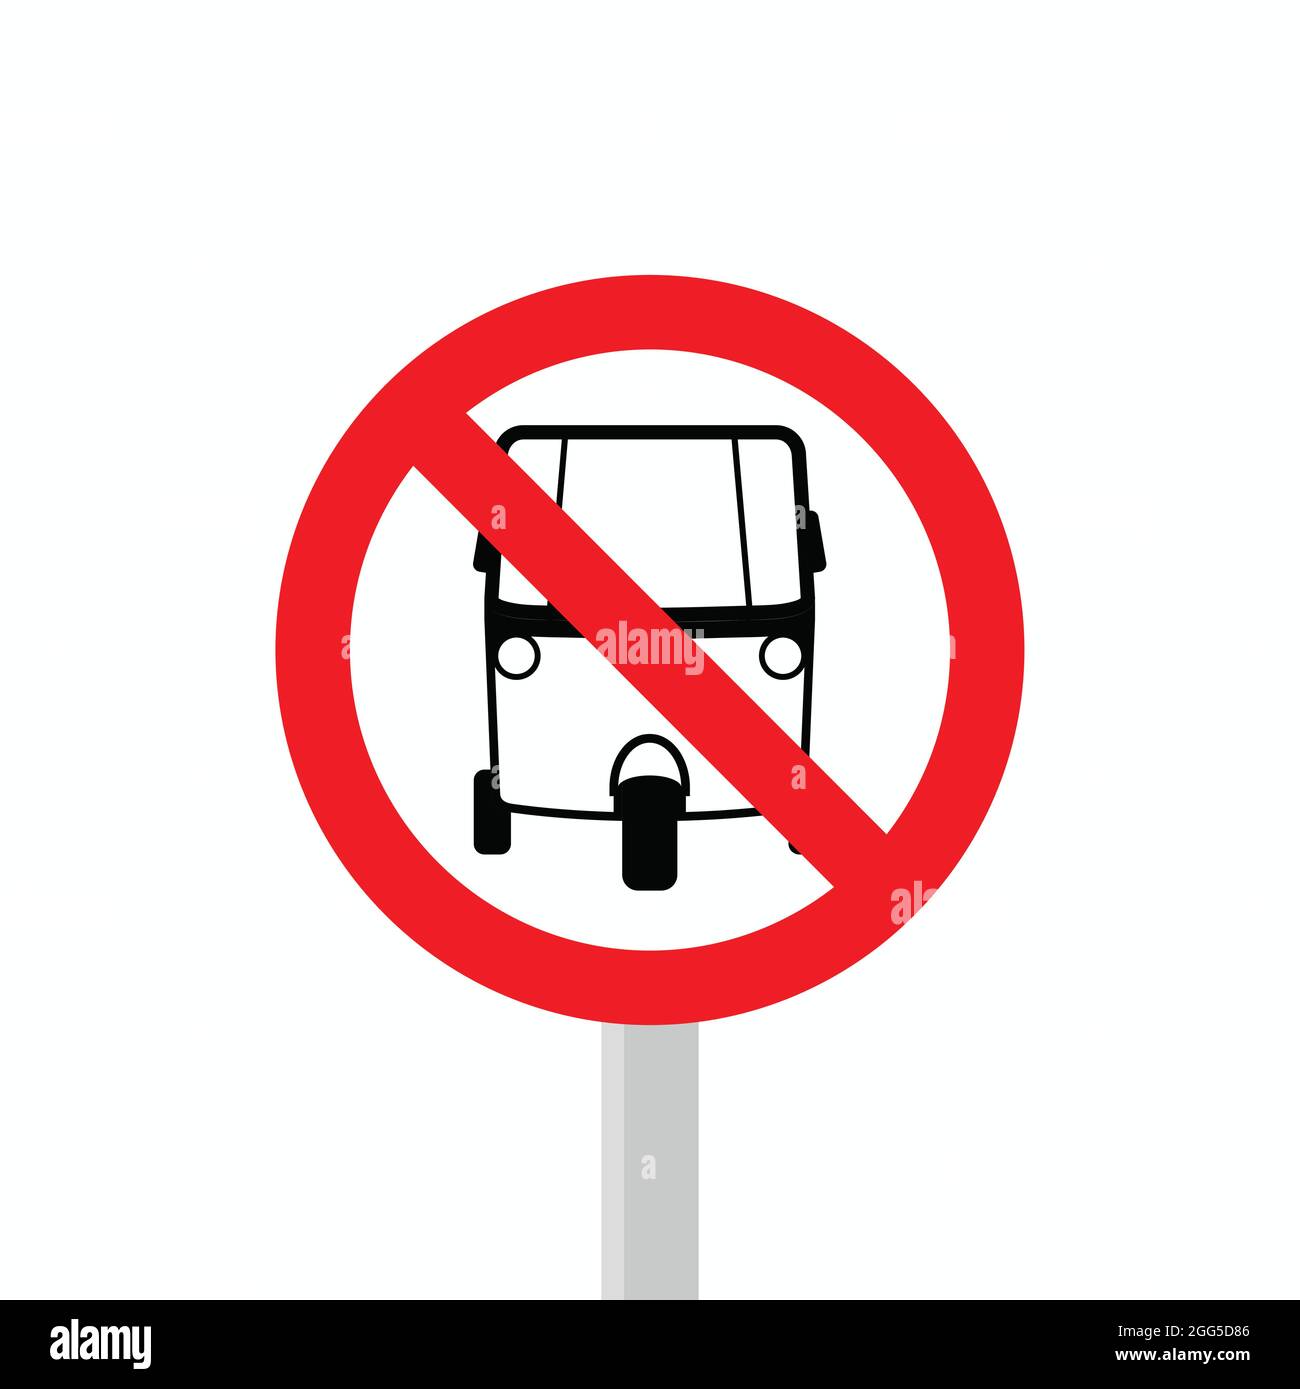 prohibited from entering three wheeled vehicles. icon and vector traffic sign. illustration Stock Vector